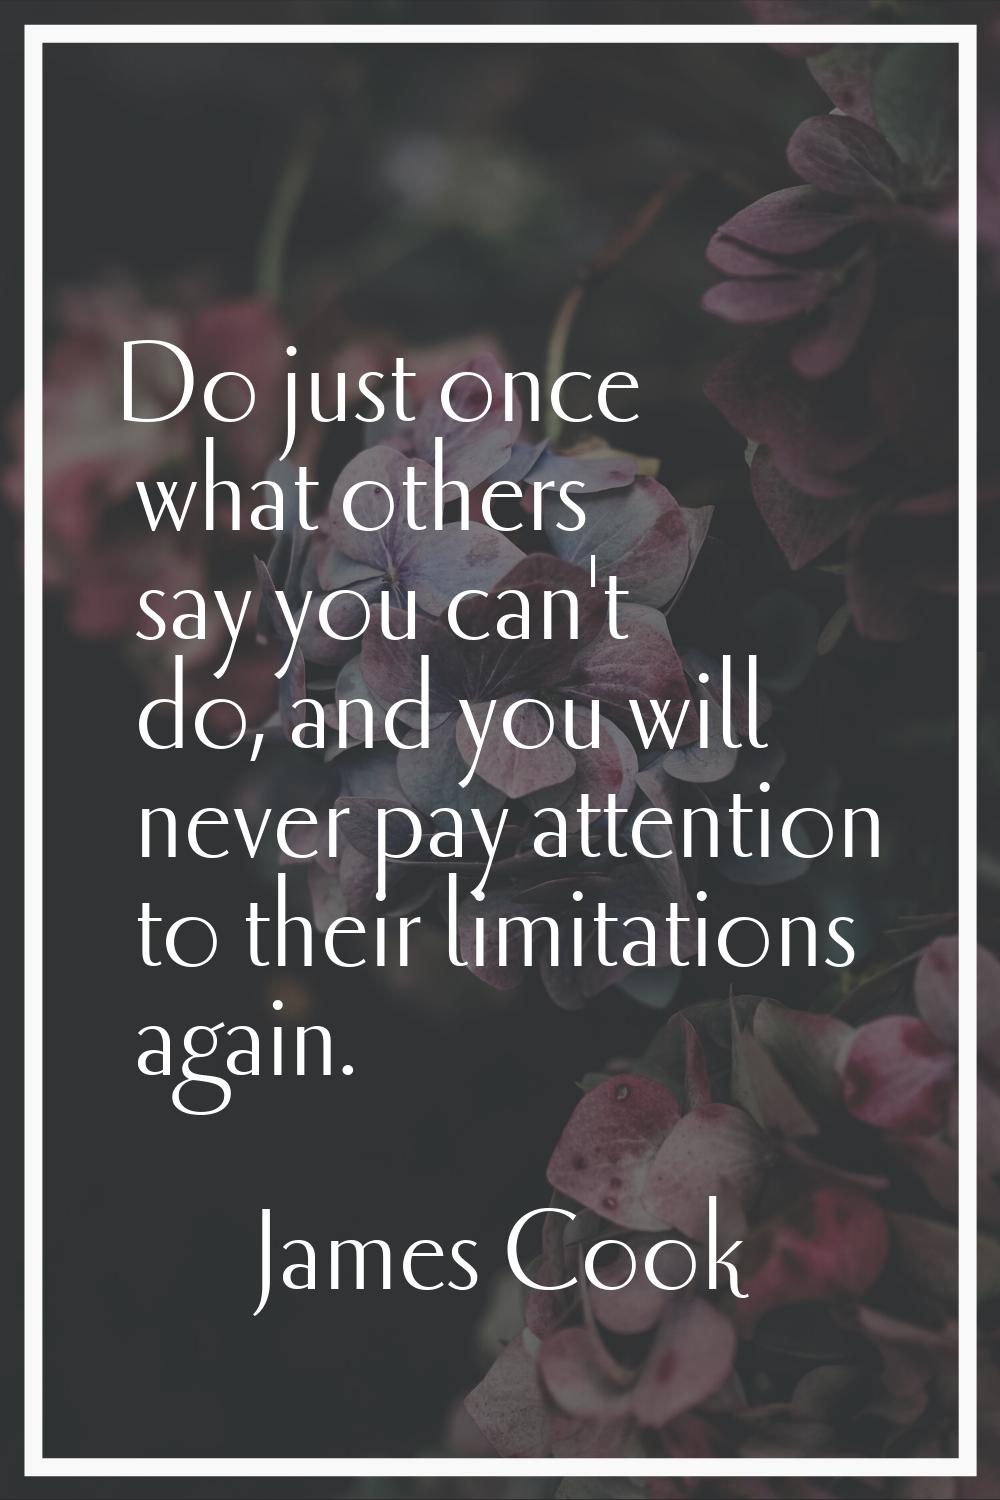 Do just once what others say you can't do, and you will never pay attention to their limitations ag